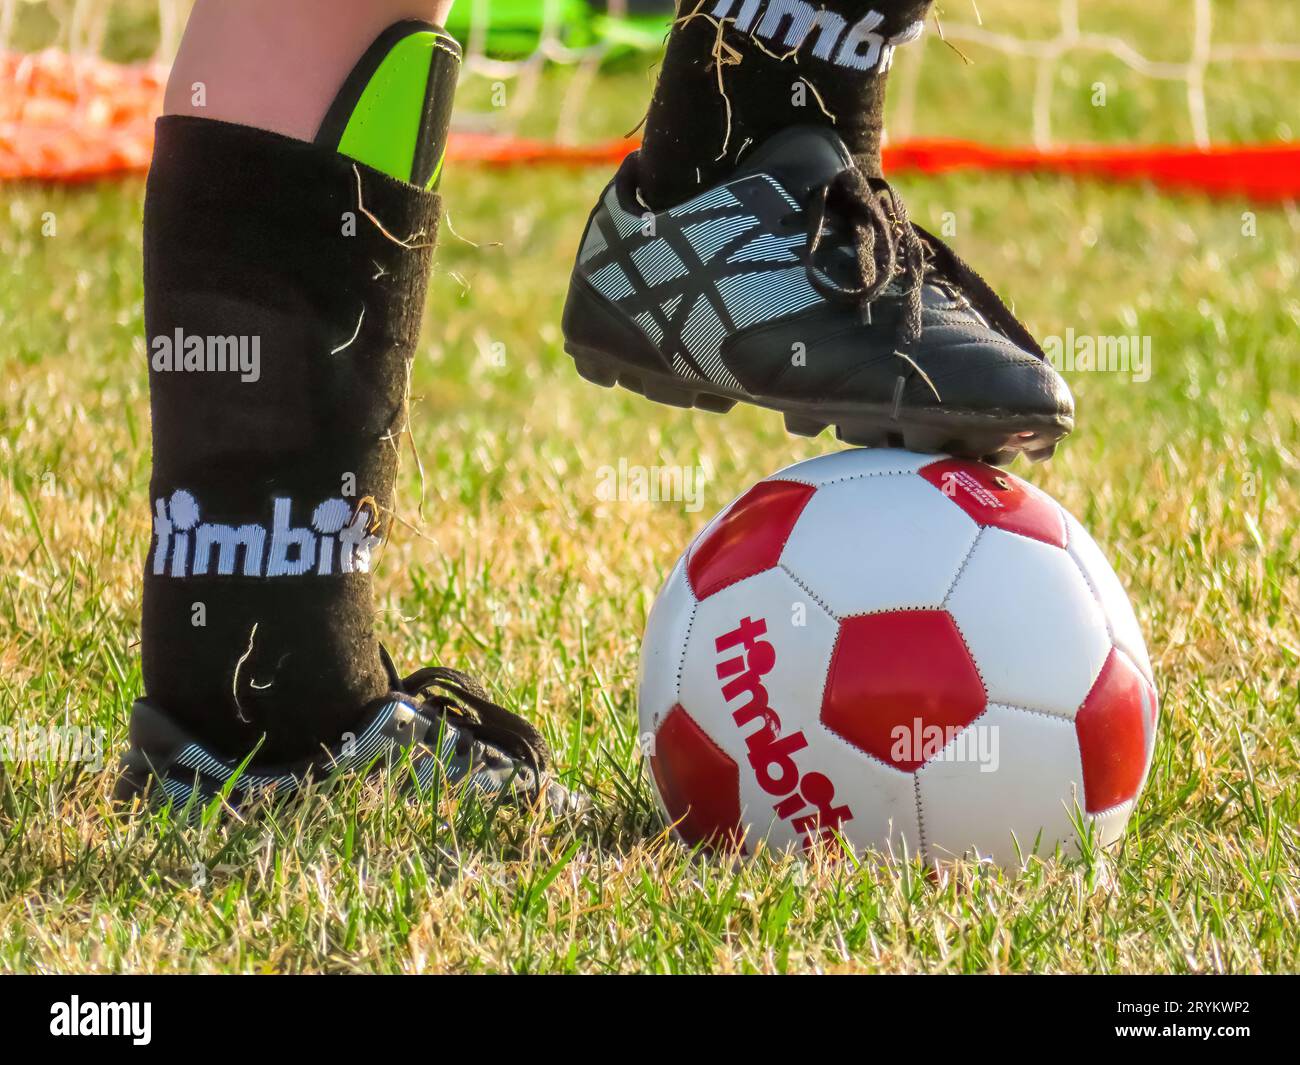 Calgary, Alberta. Canada. May 3, 2023. A young person using Athletic Works Soccer Cleats Shoes. Concept: Football soccer season. Stock Photo